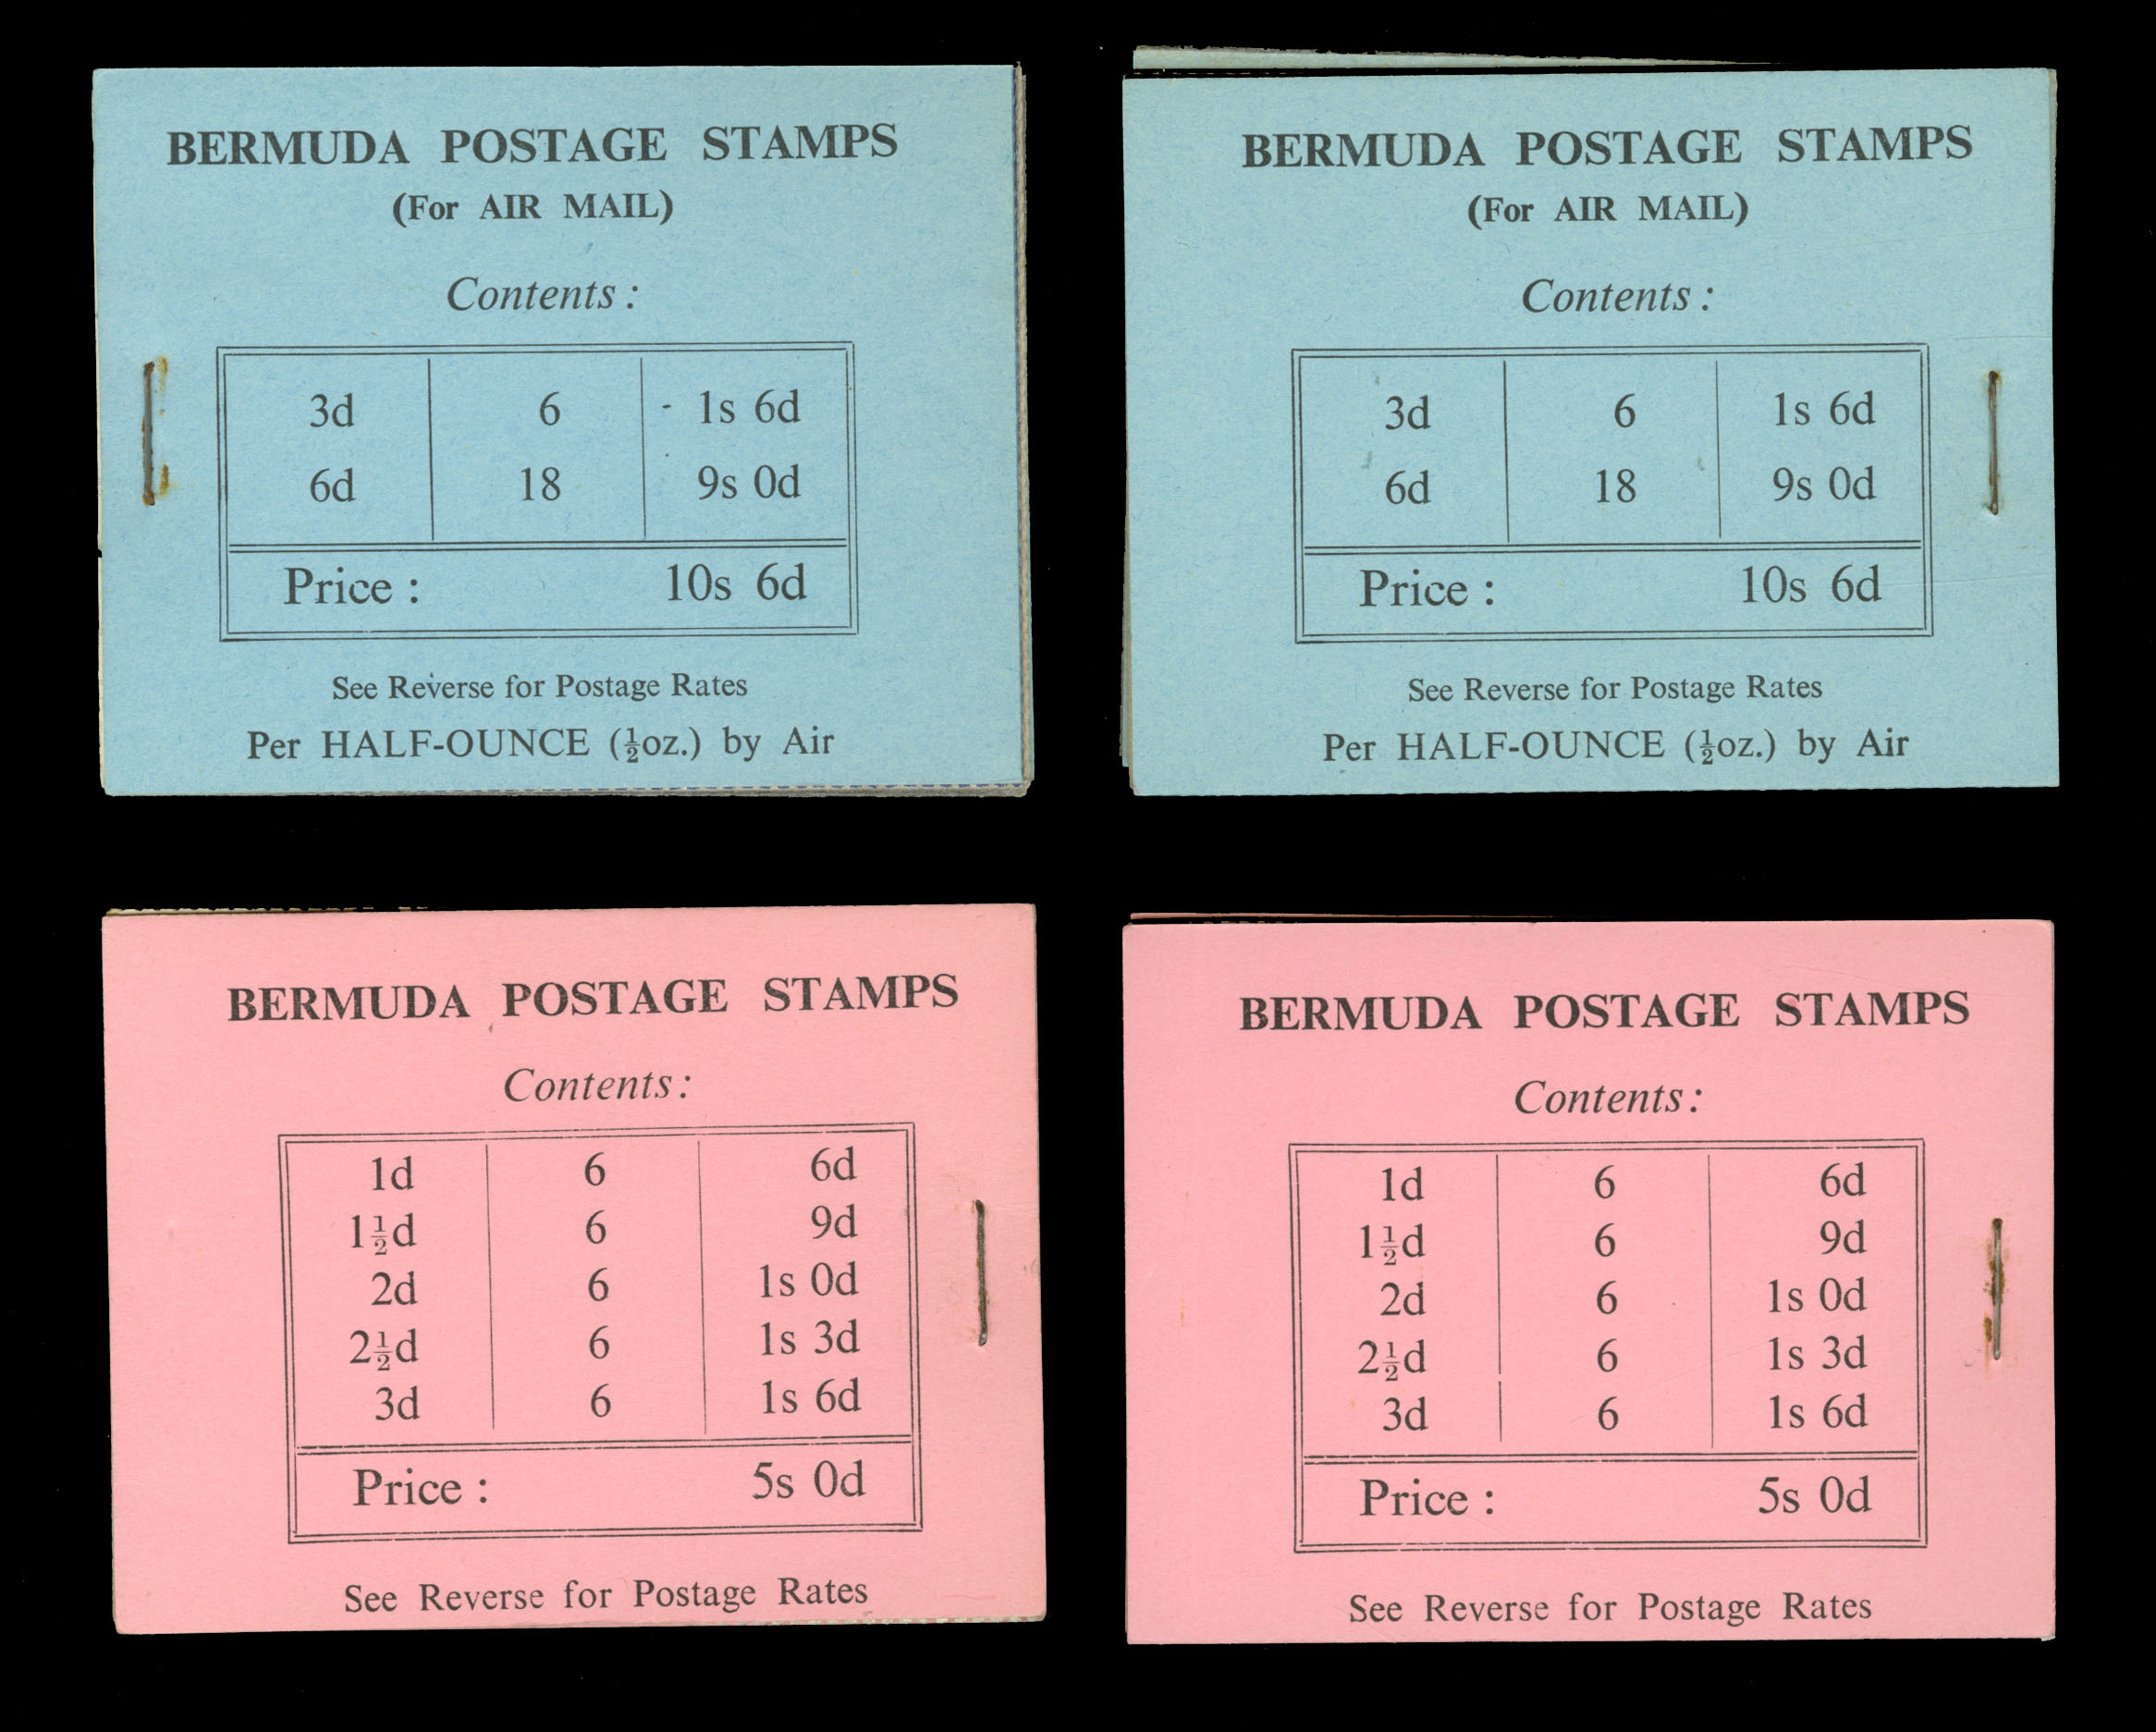 Lot 707 - Great Britain  -  Cherrystone Auctions U.S. & Worldwide Stamps & Postal History